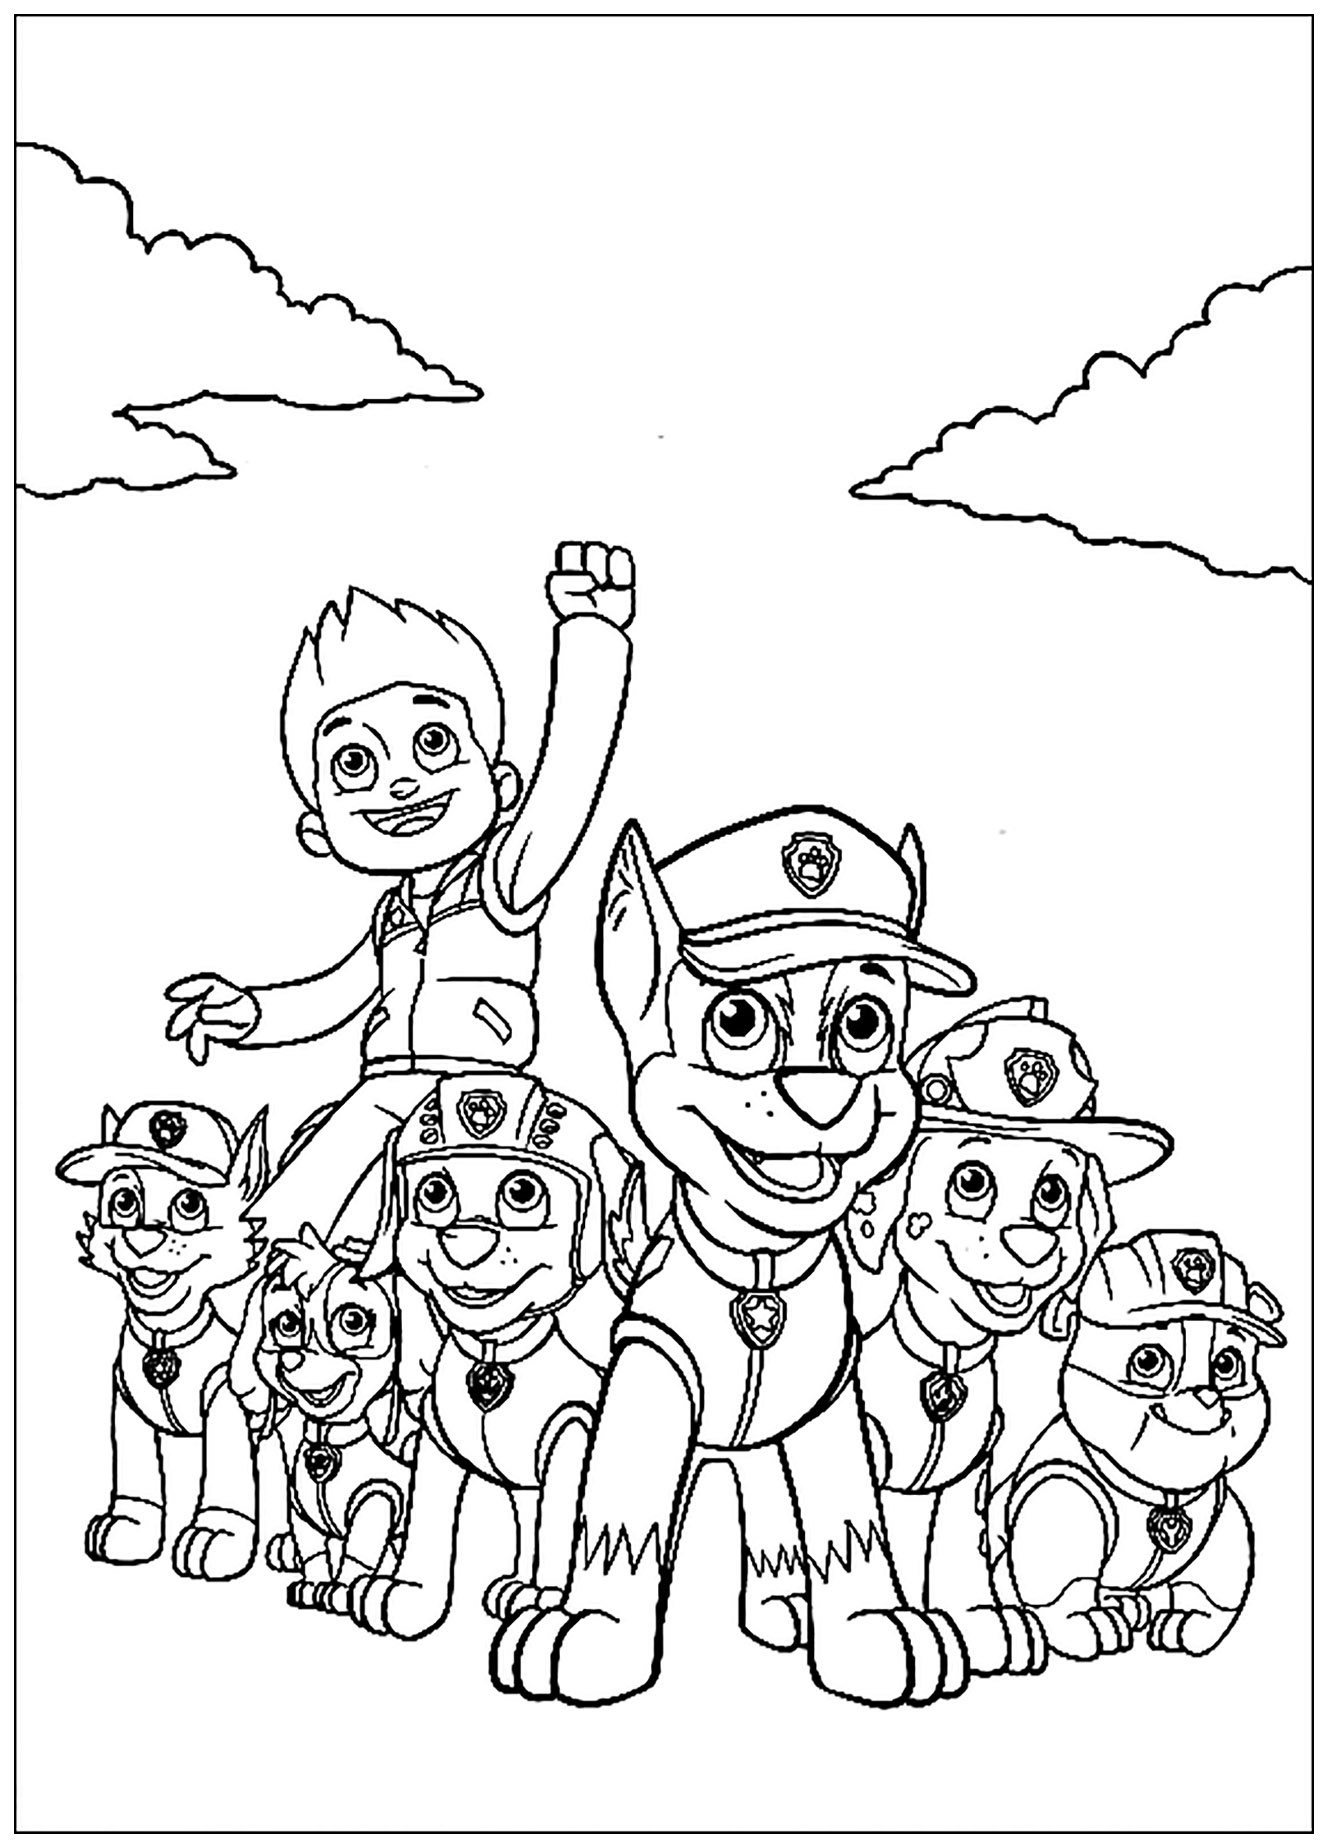 Top 10 Dogs and Friends Coloring Pages - FREE PRINT